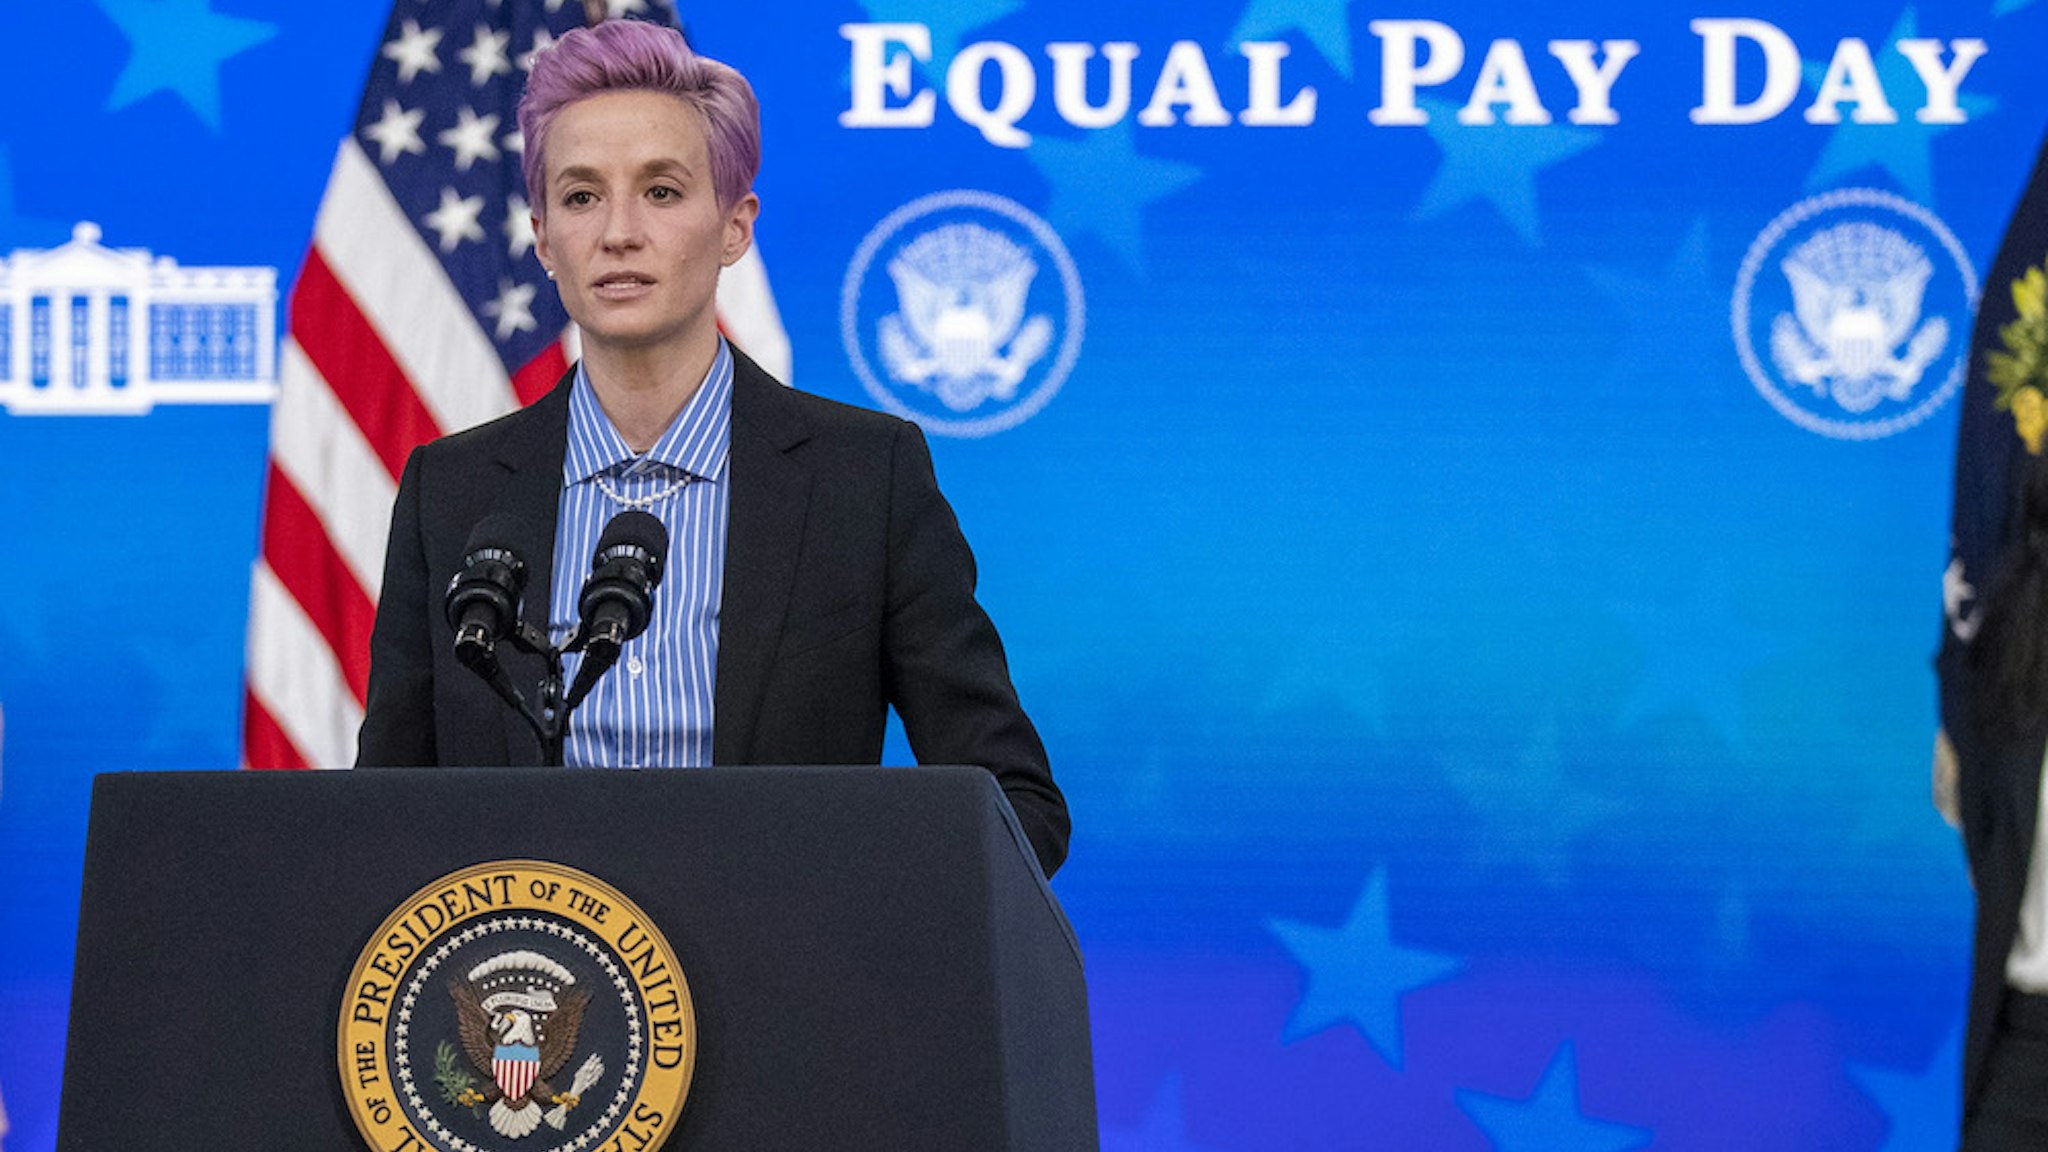 Megan Rapinoe, player with the U.S. Women's National Soccer Team, speaks as U.S. President Joe Biden and First Lady Jill Biden listen during an event marking Equal Pay Day in the Eisenhower Executive Office Building in Washington, D.C., U.S., on Wednesday, March 24, 2021. The Biden administration has signaled plans to strengthen gender equity at a time when women in the U.S. are disproportionately exiting the workforce compared with men during the Covid-19 pandemic, and are paid about 82 cents on the dollar compared with men. Photographer: Shawn Thew/EPA/Bloomberg